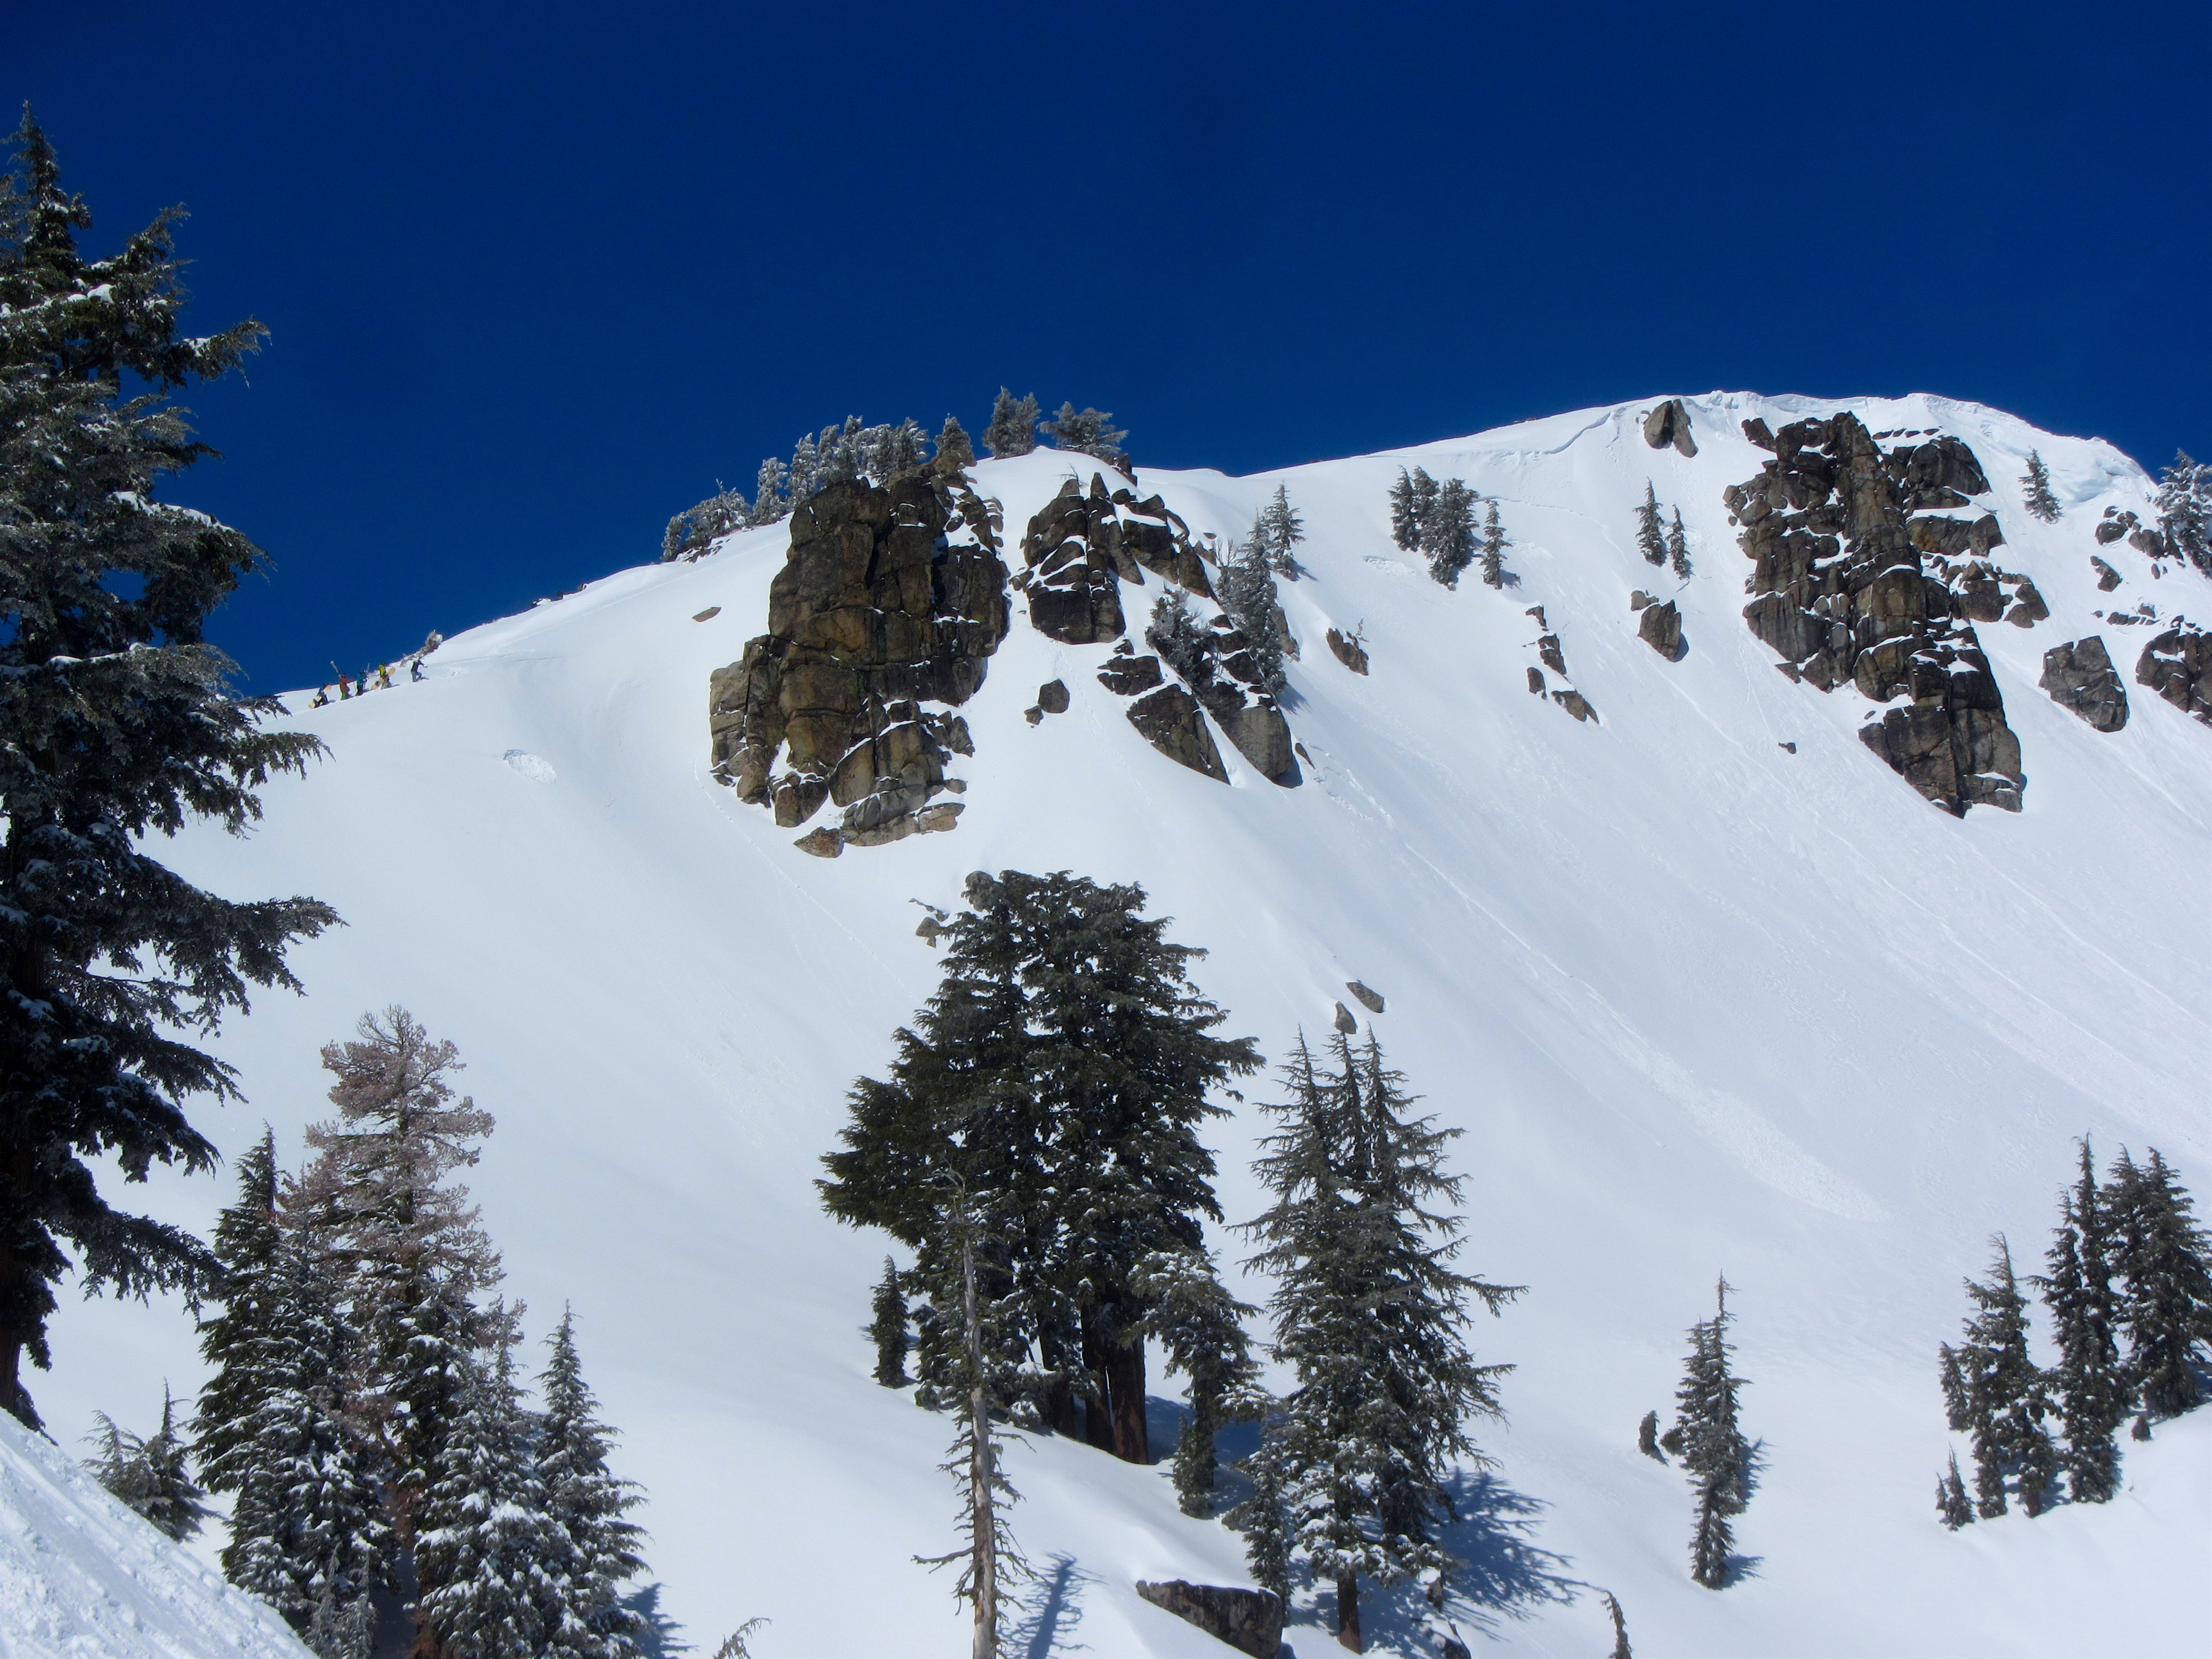 Granite Chief Peak was cooked by the time it opened. photo: snowbrains